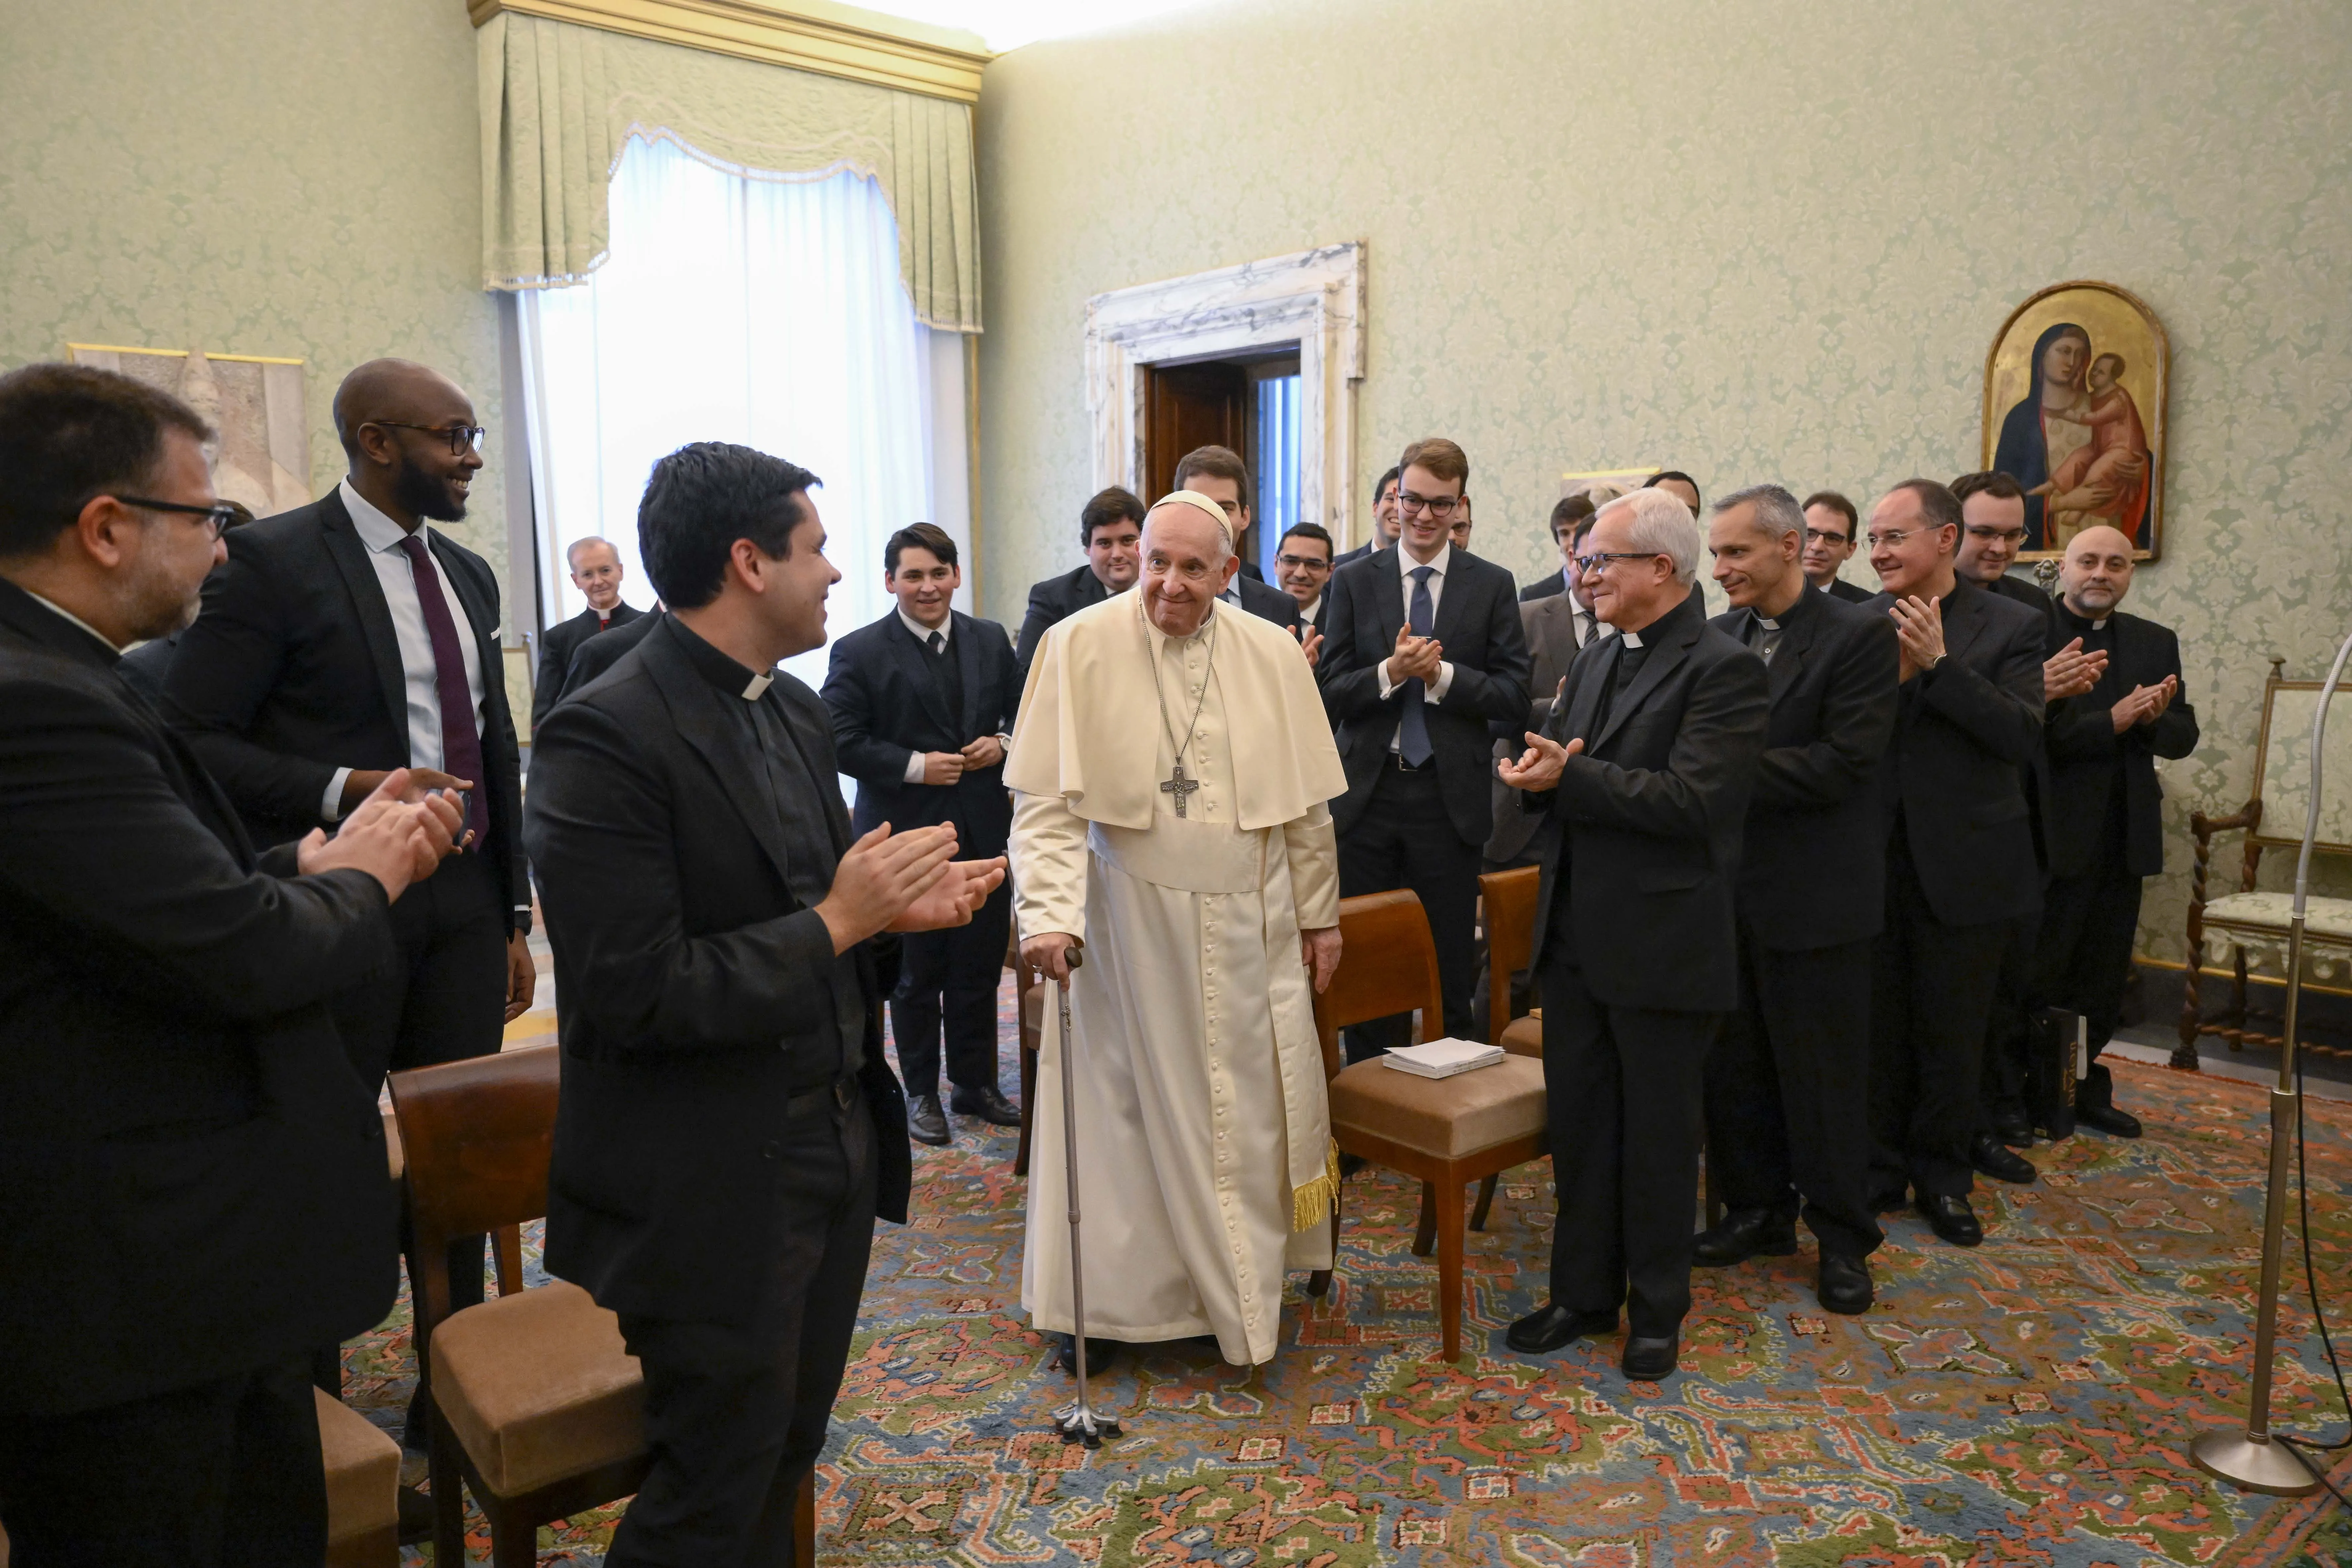 Pope Francis spoke to seminarians from Barcelona at the Vatican on Dec. 10, 2022. Vatican Media